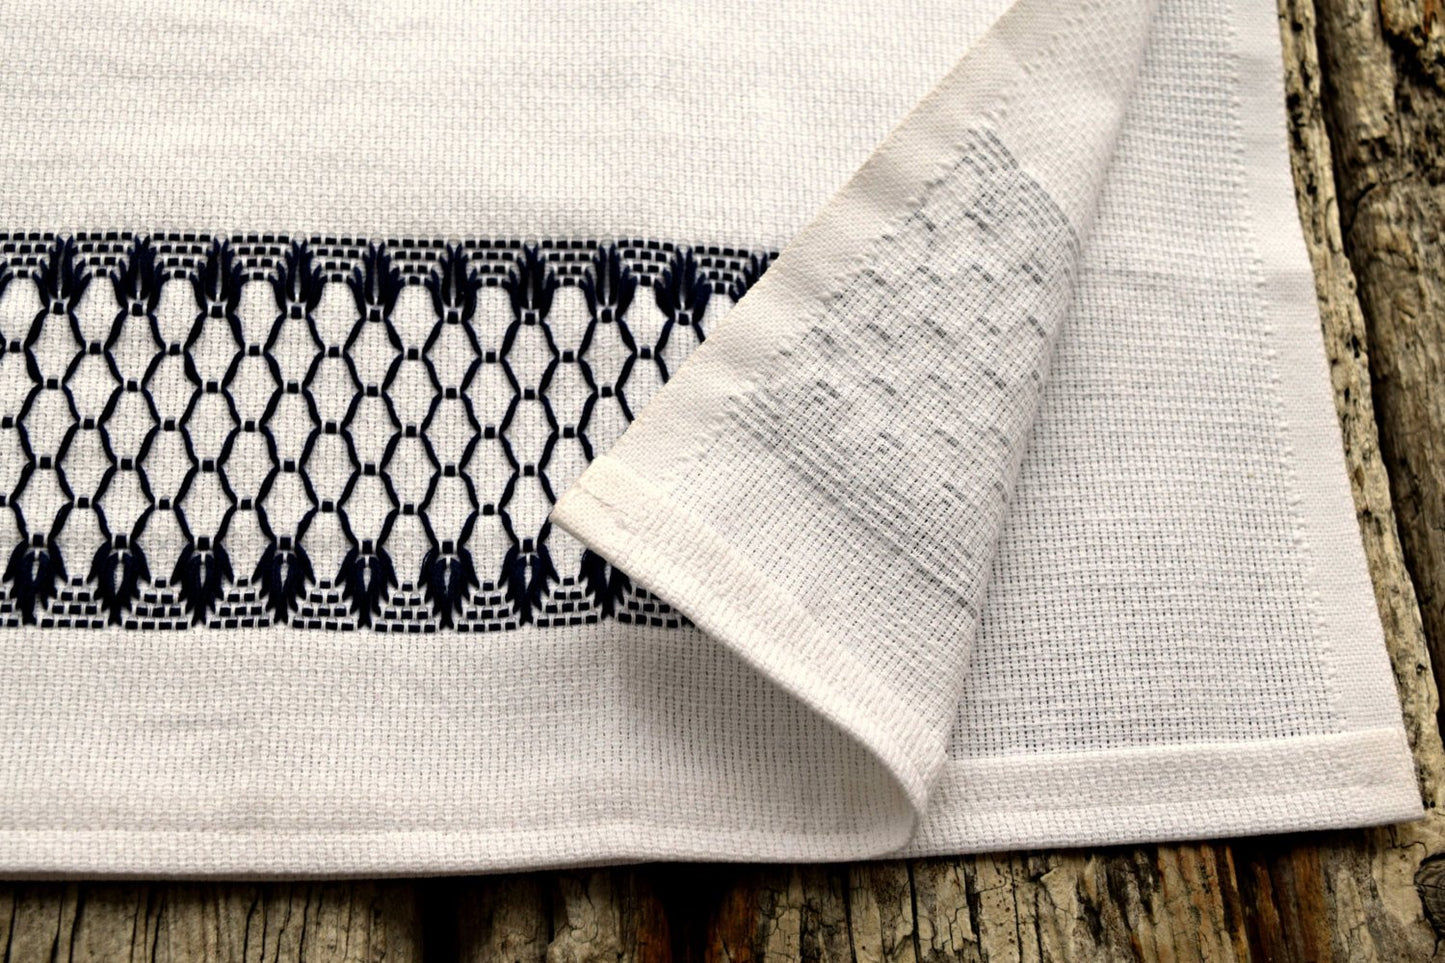 Huckaback dish towel showing front and back of embroidery in navy